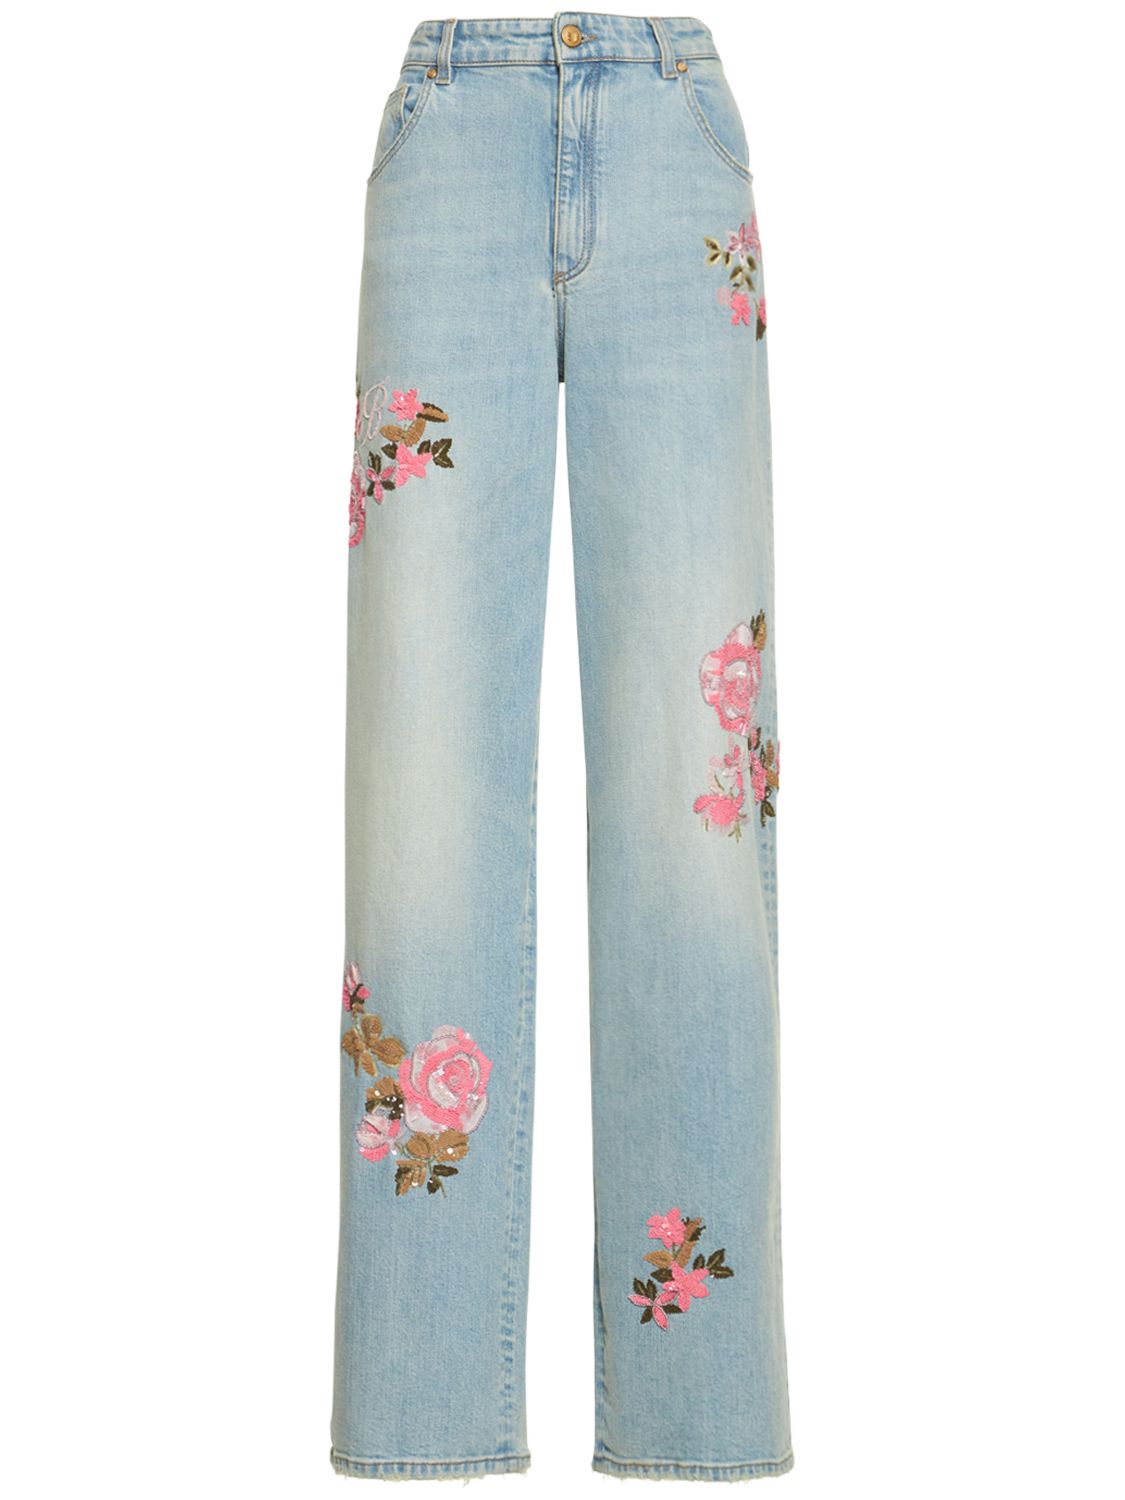 Embroidered Roses Wide Denim Jeans